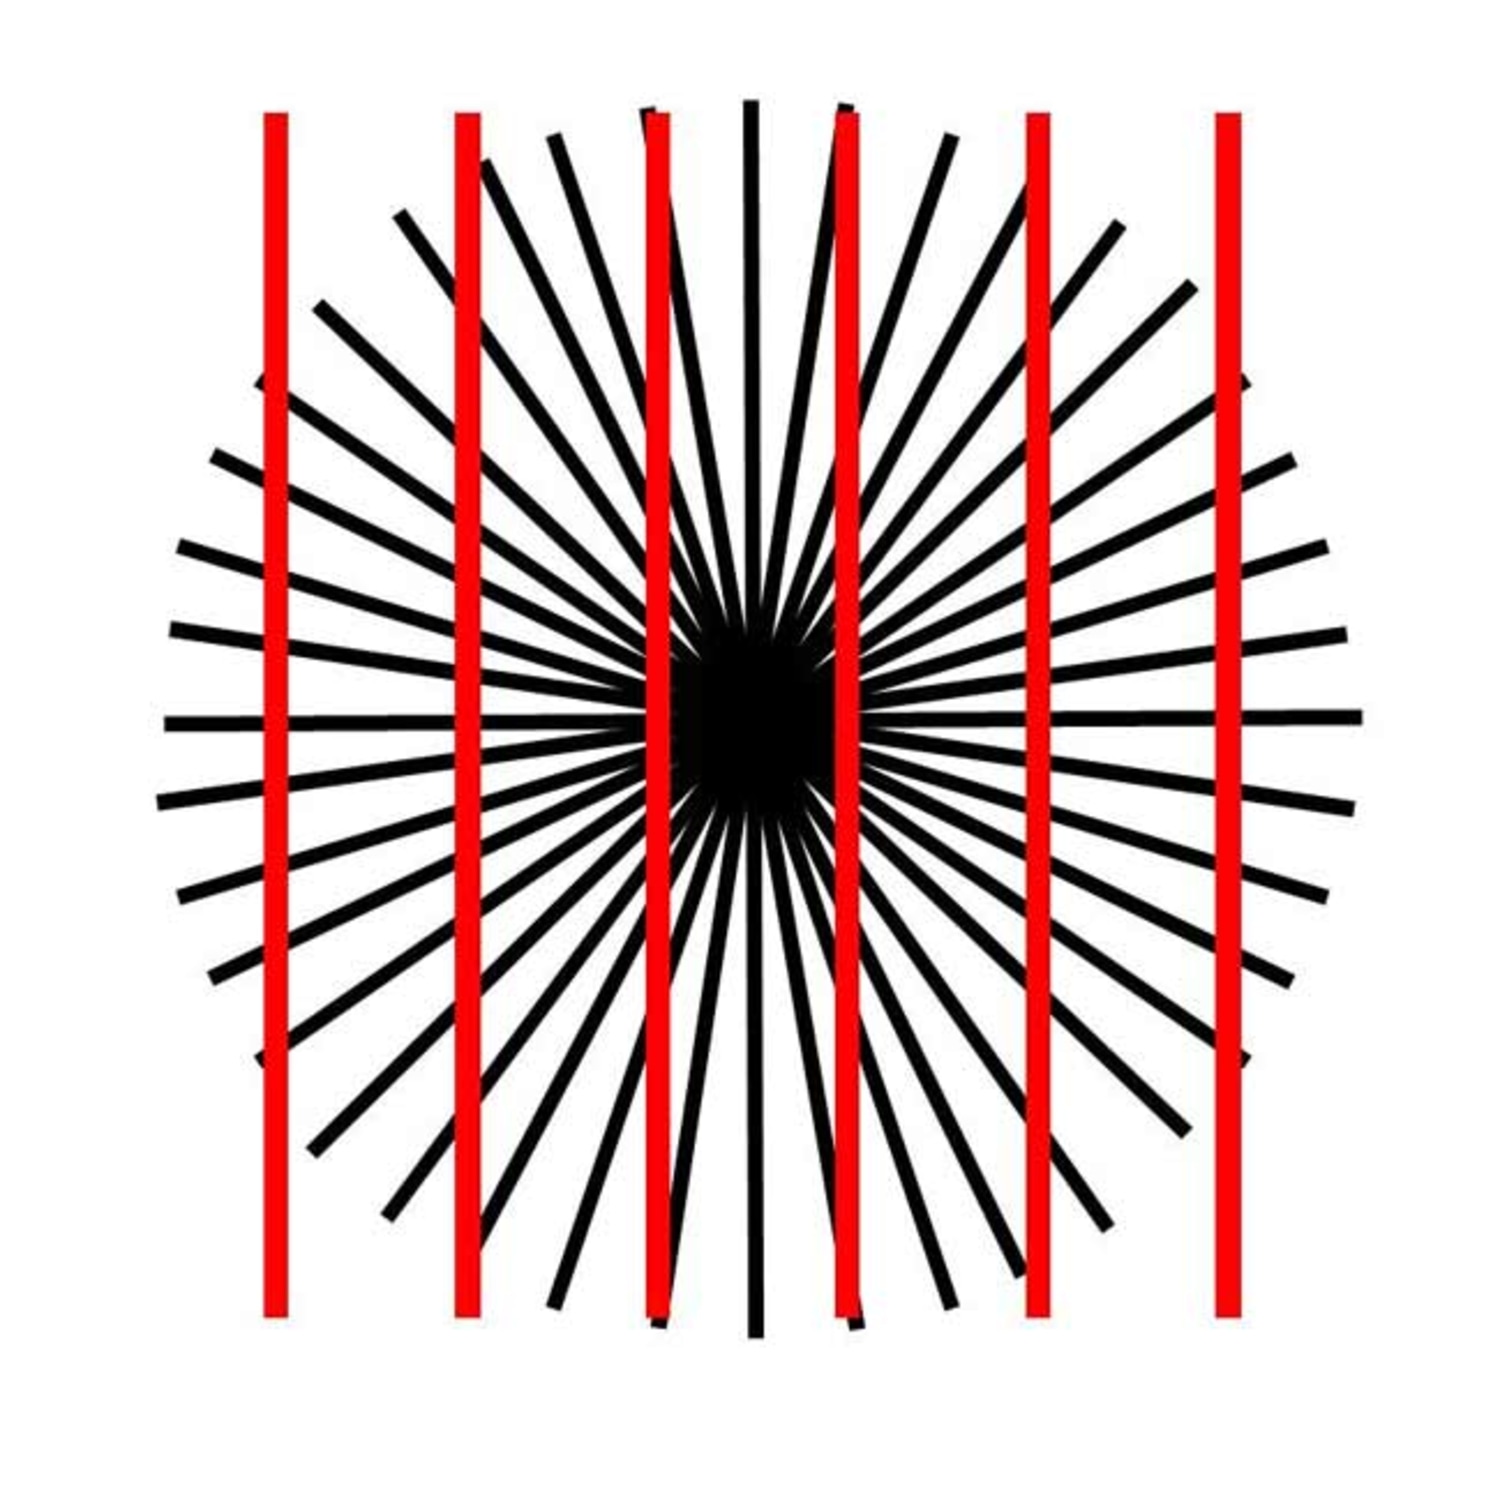 A) Hering illusion. Straight lines appear to be curved outwards